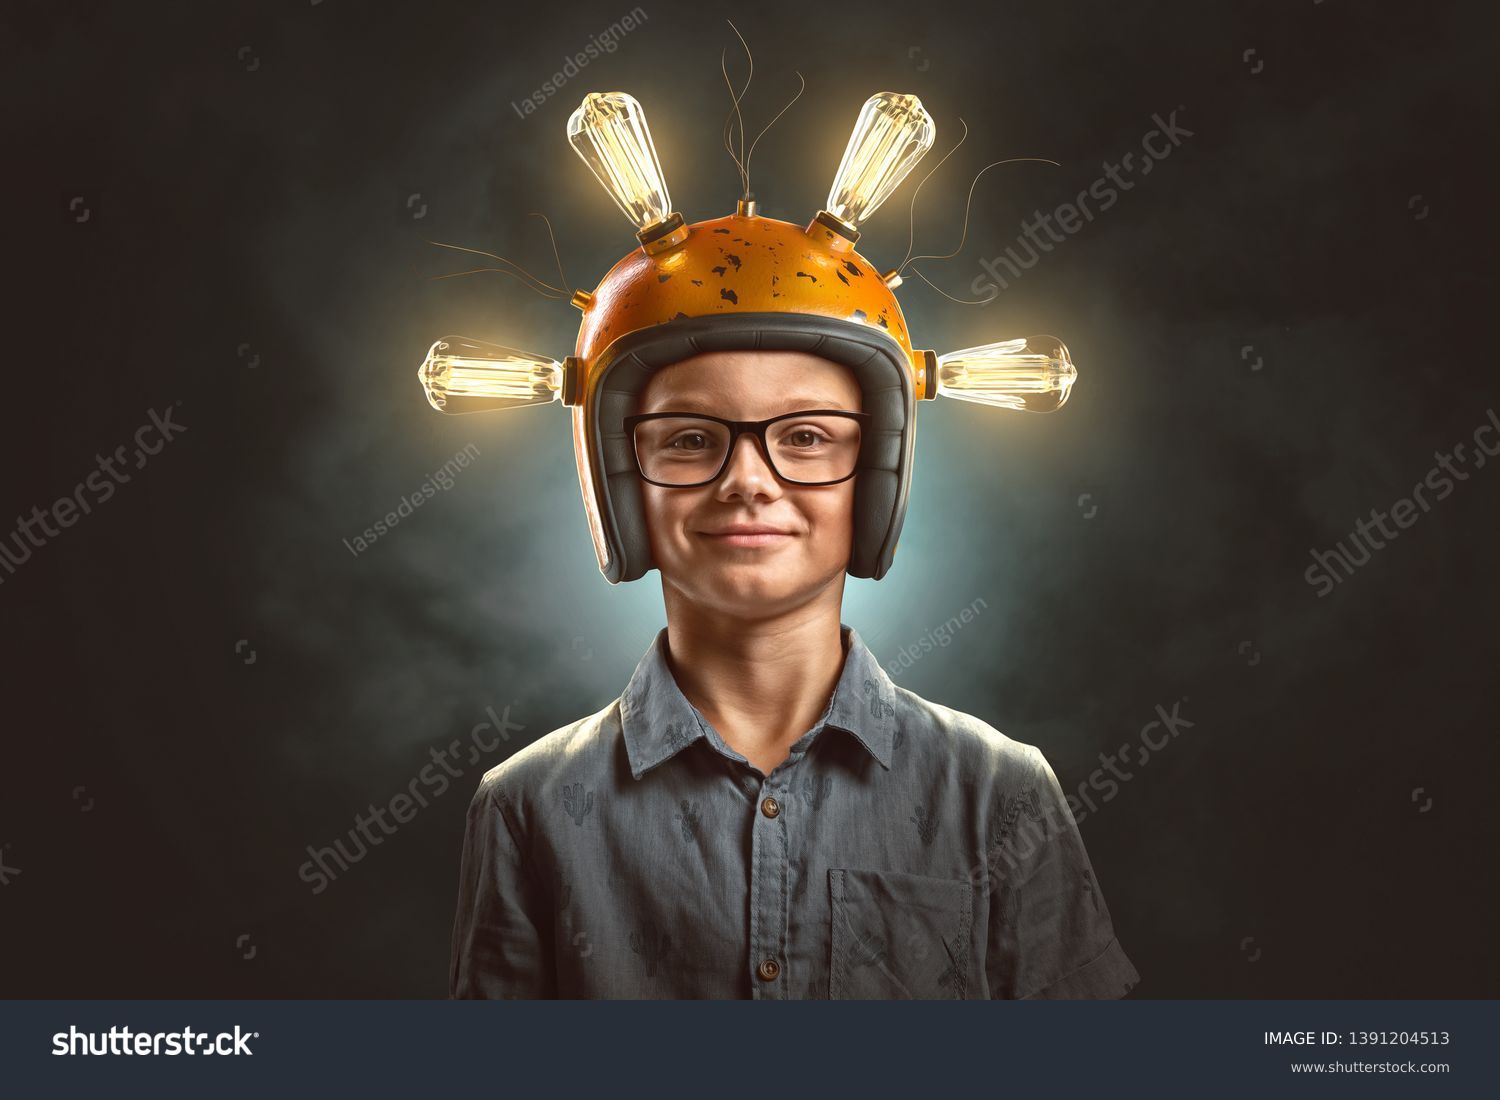 Clever kid with light bulb helmet  #1391204513